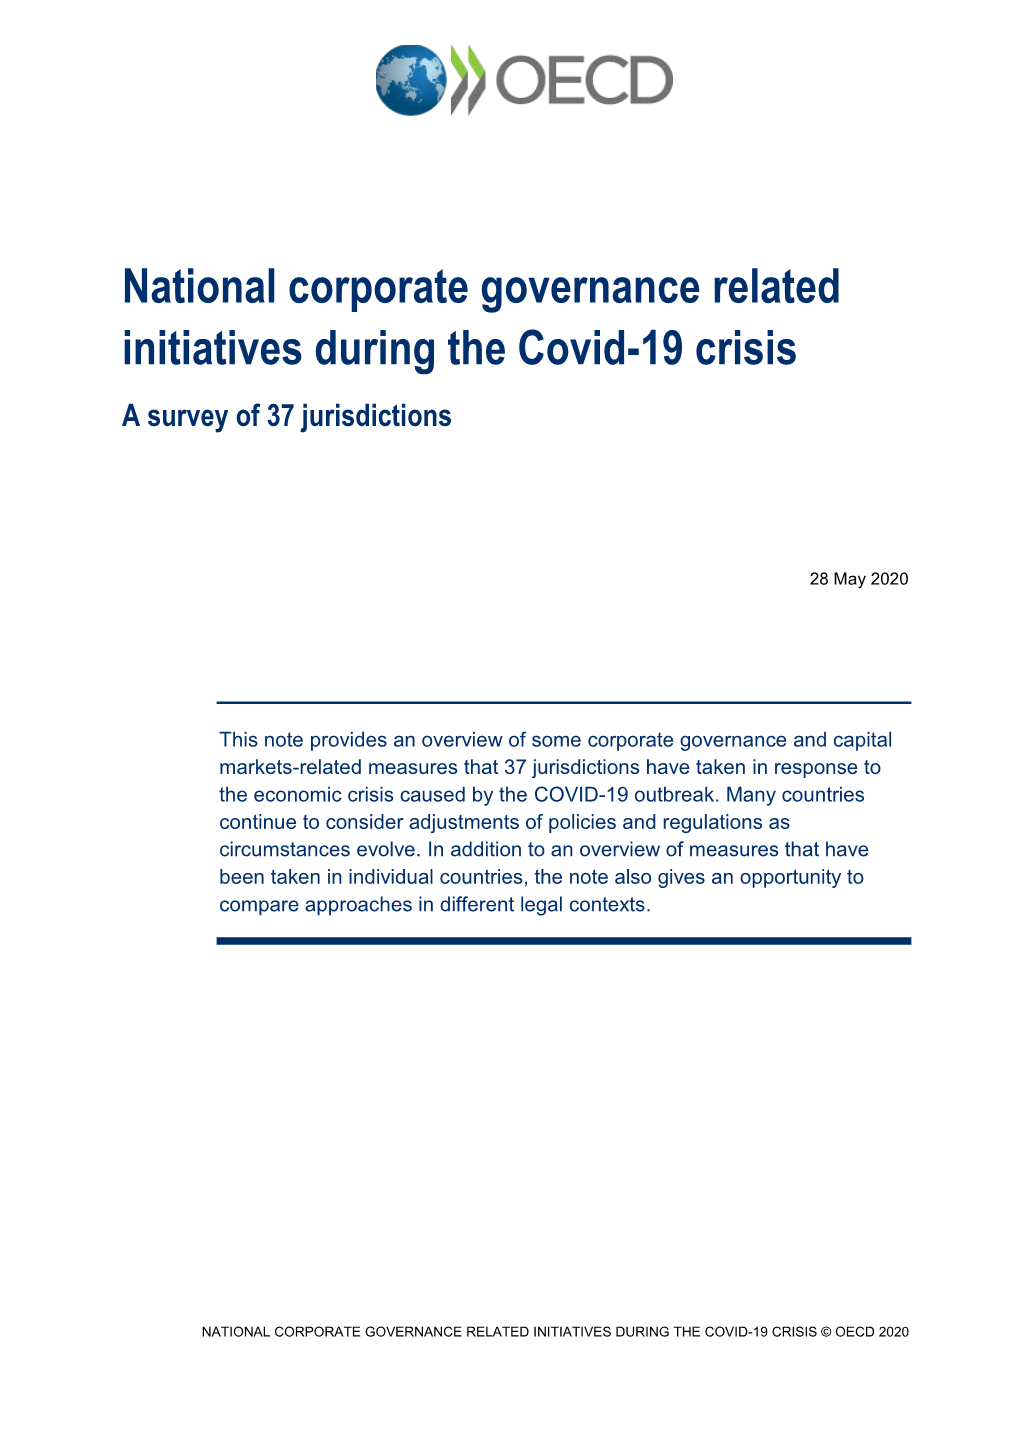 National Corporate Governance Related Initiatives During the Covid-19 Crisis a Survey of 37 Jurisdictions